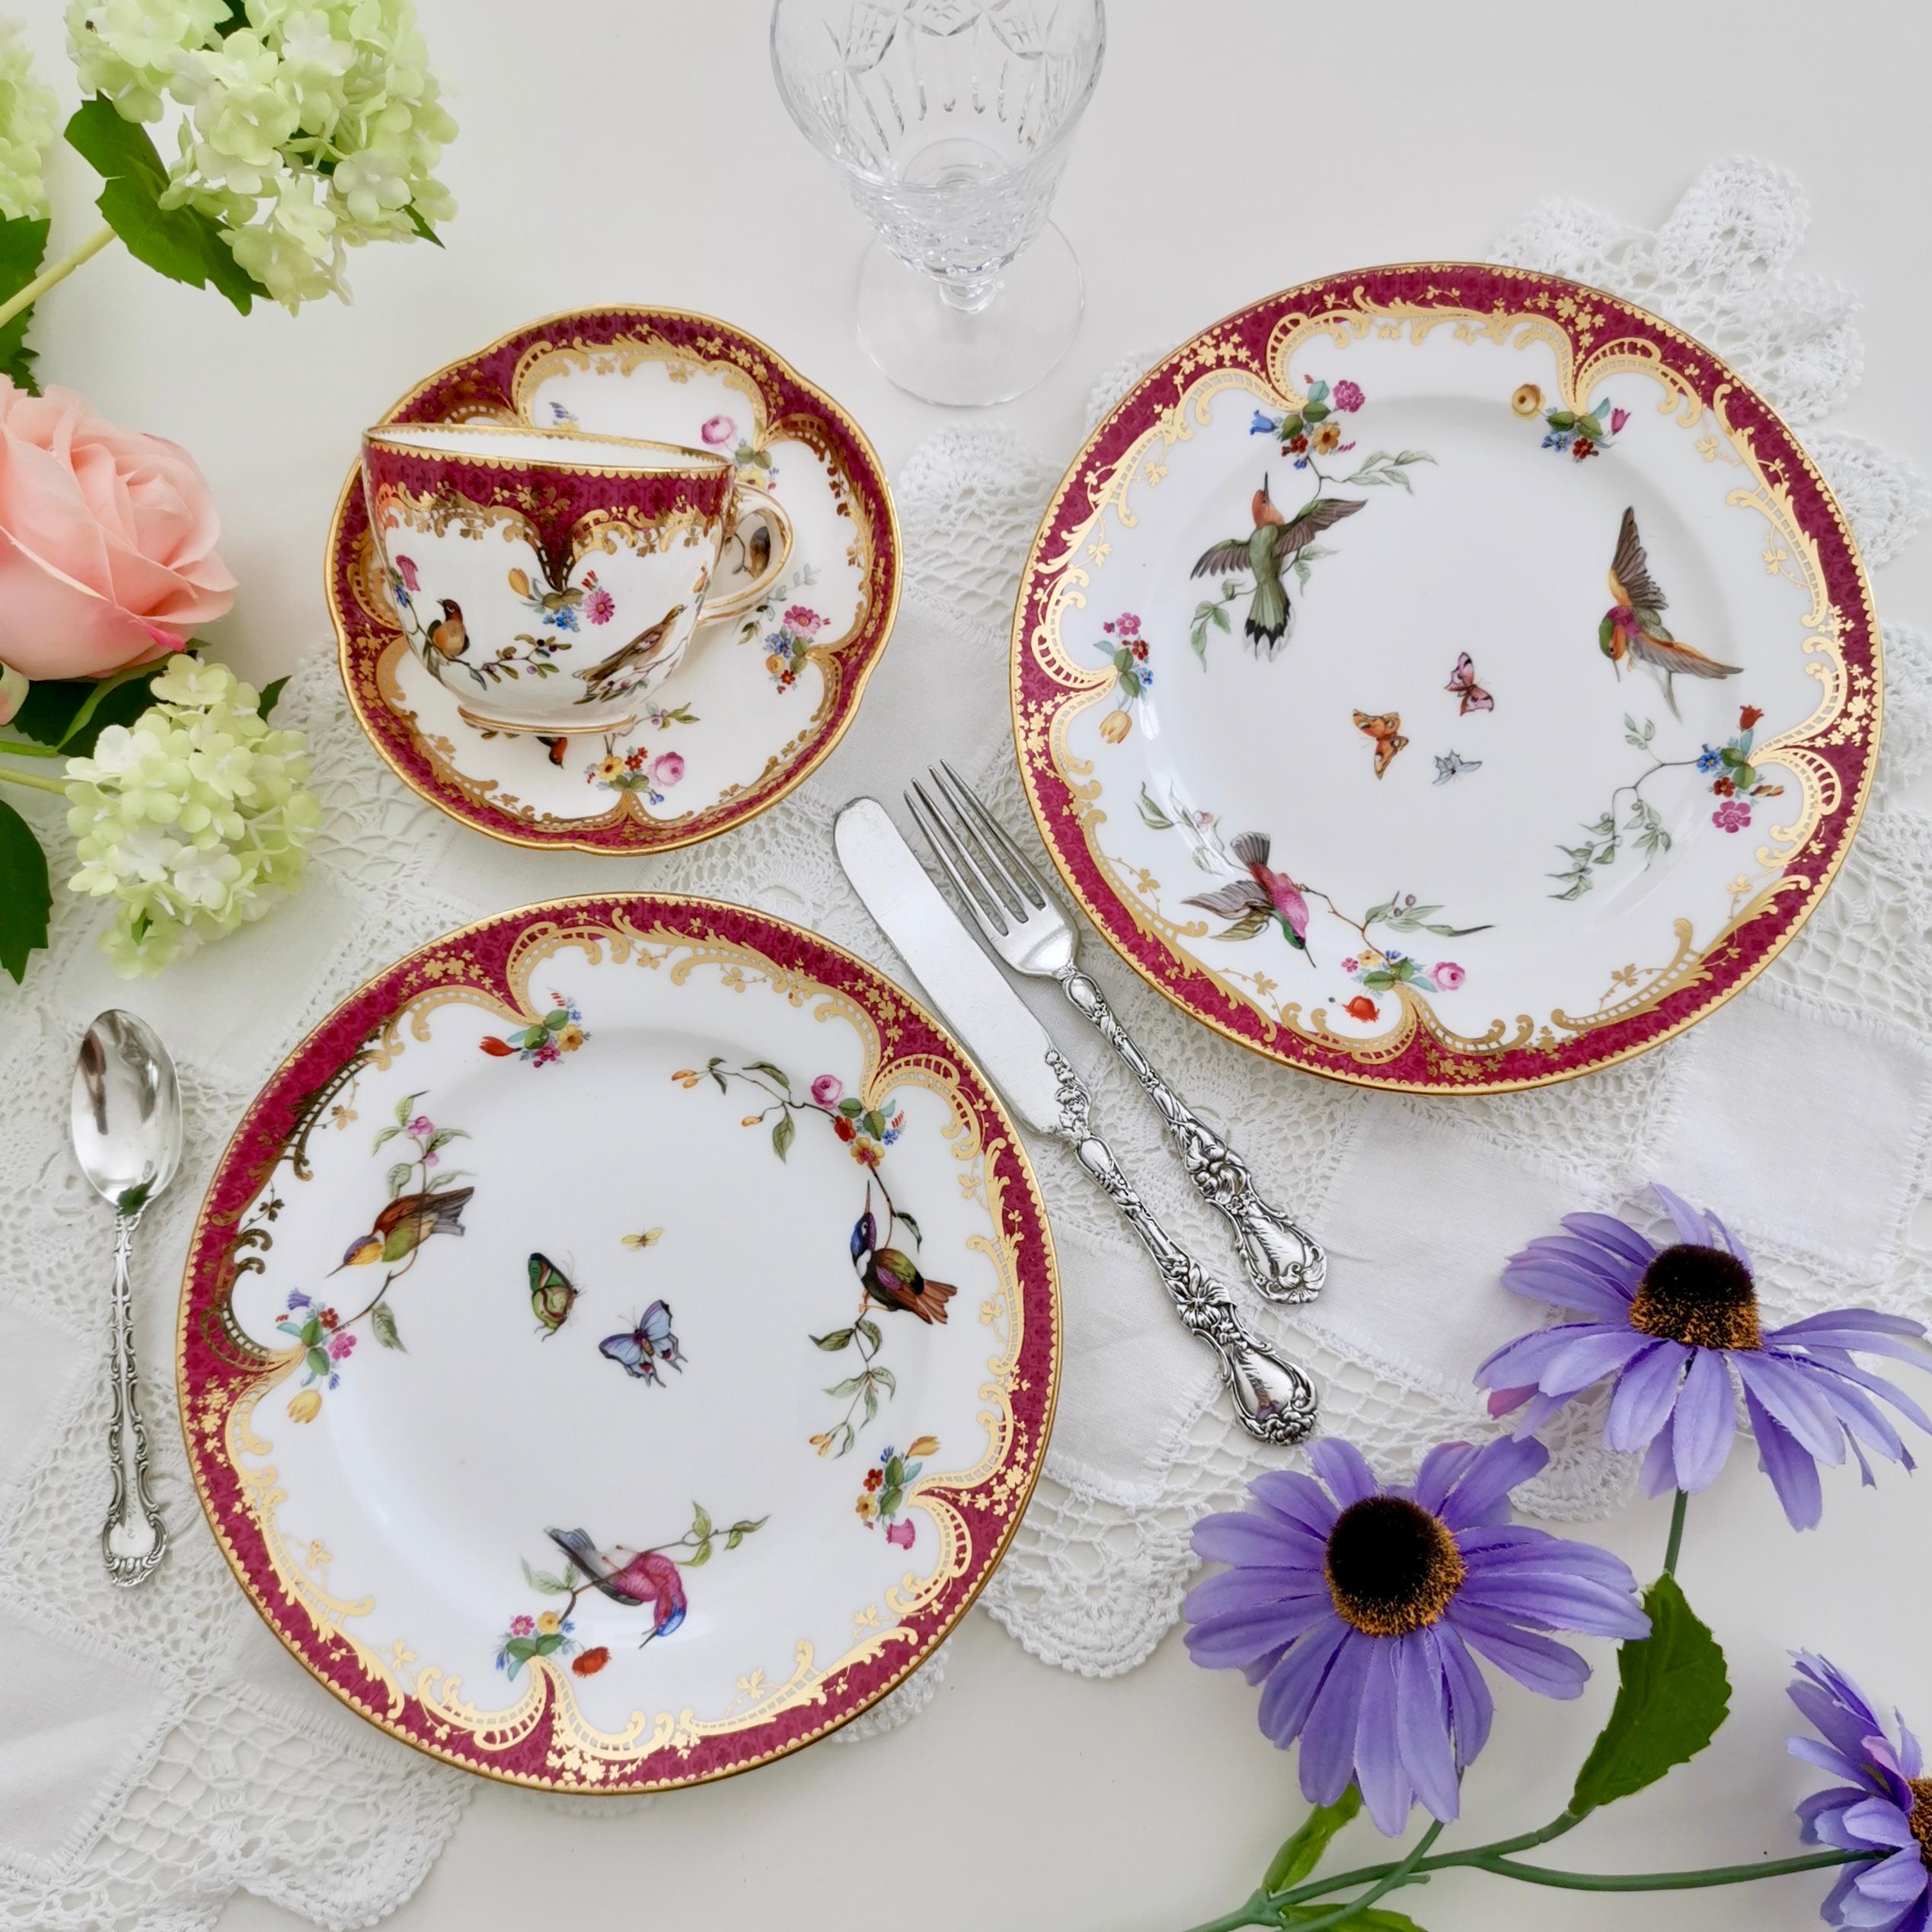 This is a small plate made by Coalport in circa 1865. The plate is hand painted with beautiful humming birds and butterflies by the famous porcelain artist John Randall.

Coalport was one of the leading potters in 19th and 20th century, coming out